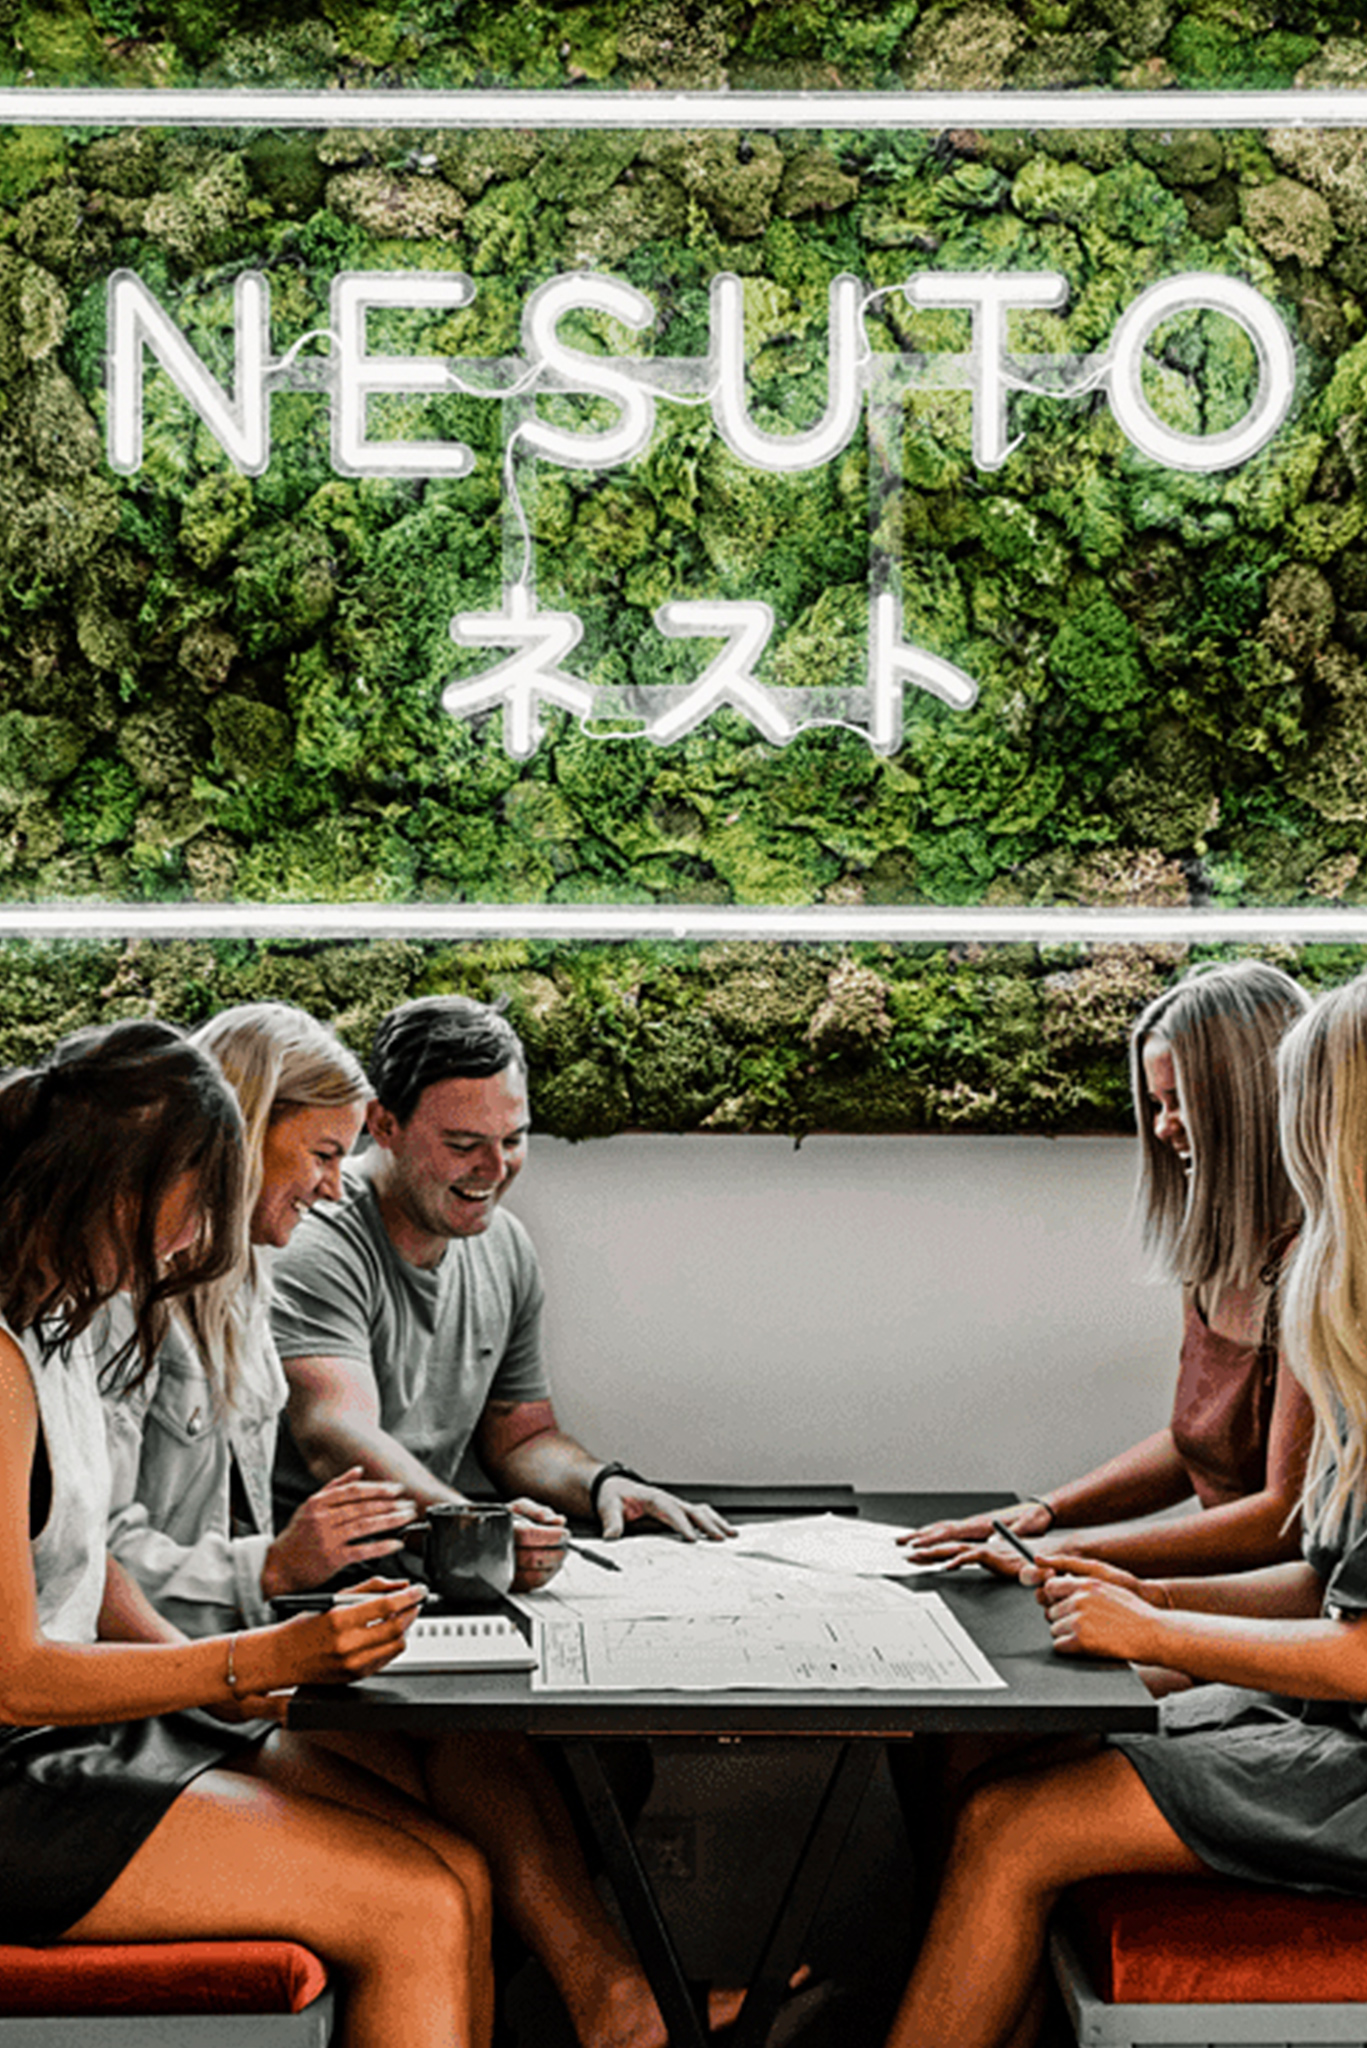 Moss installation with neon sign reading 'Nesuto' above coworking table